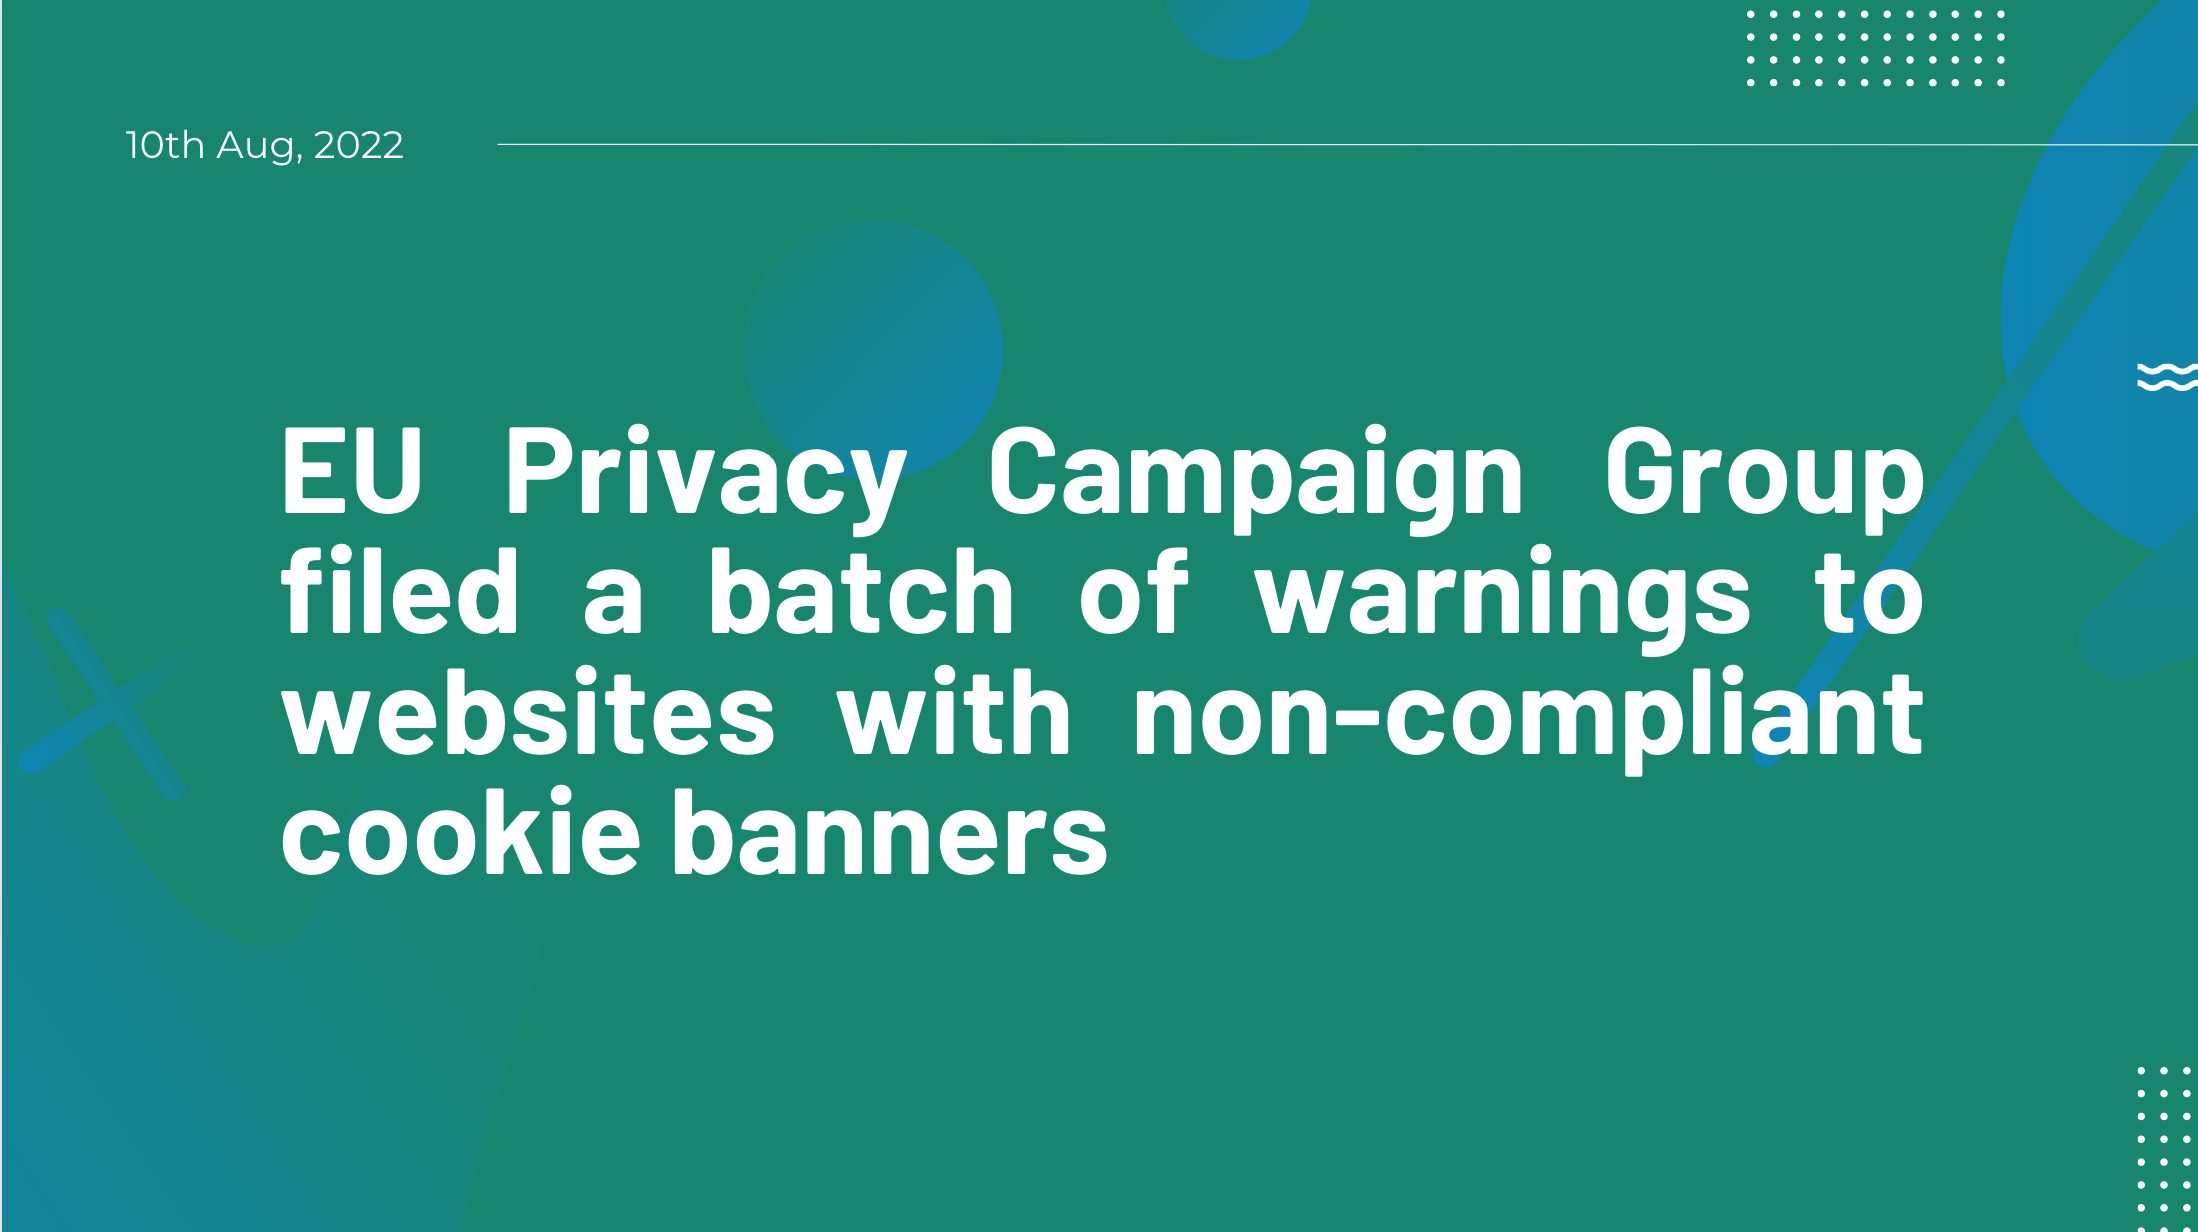 EU Privacy Campaign Group filed a batch of warnings to websites with non-compliant cookie banners